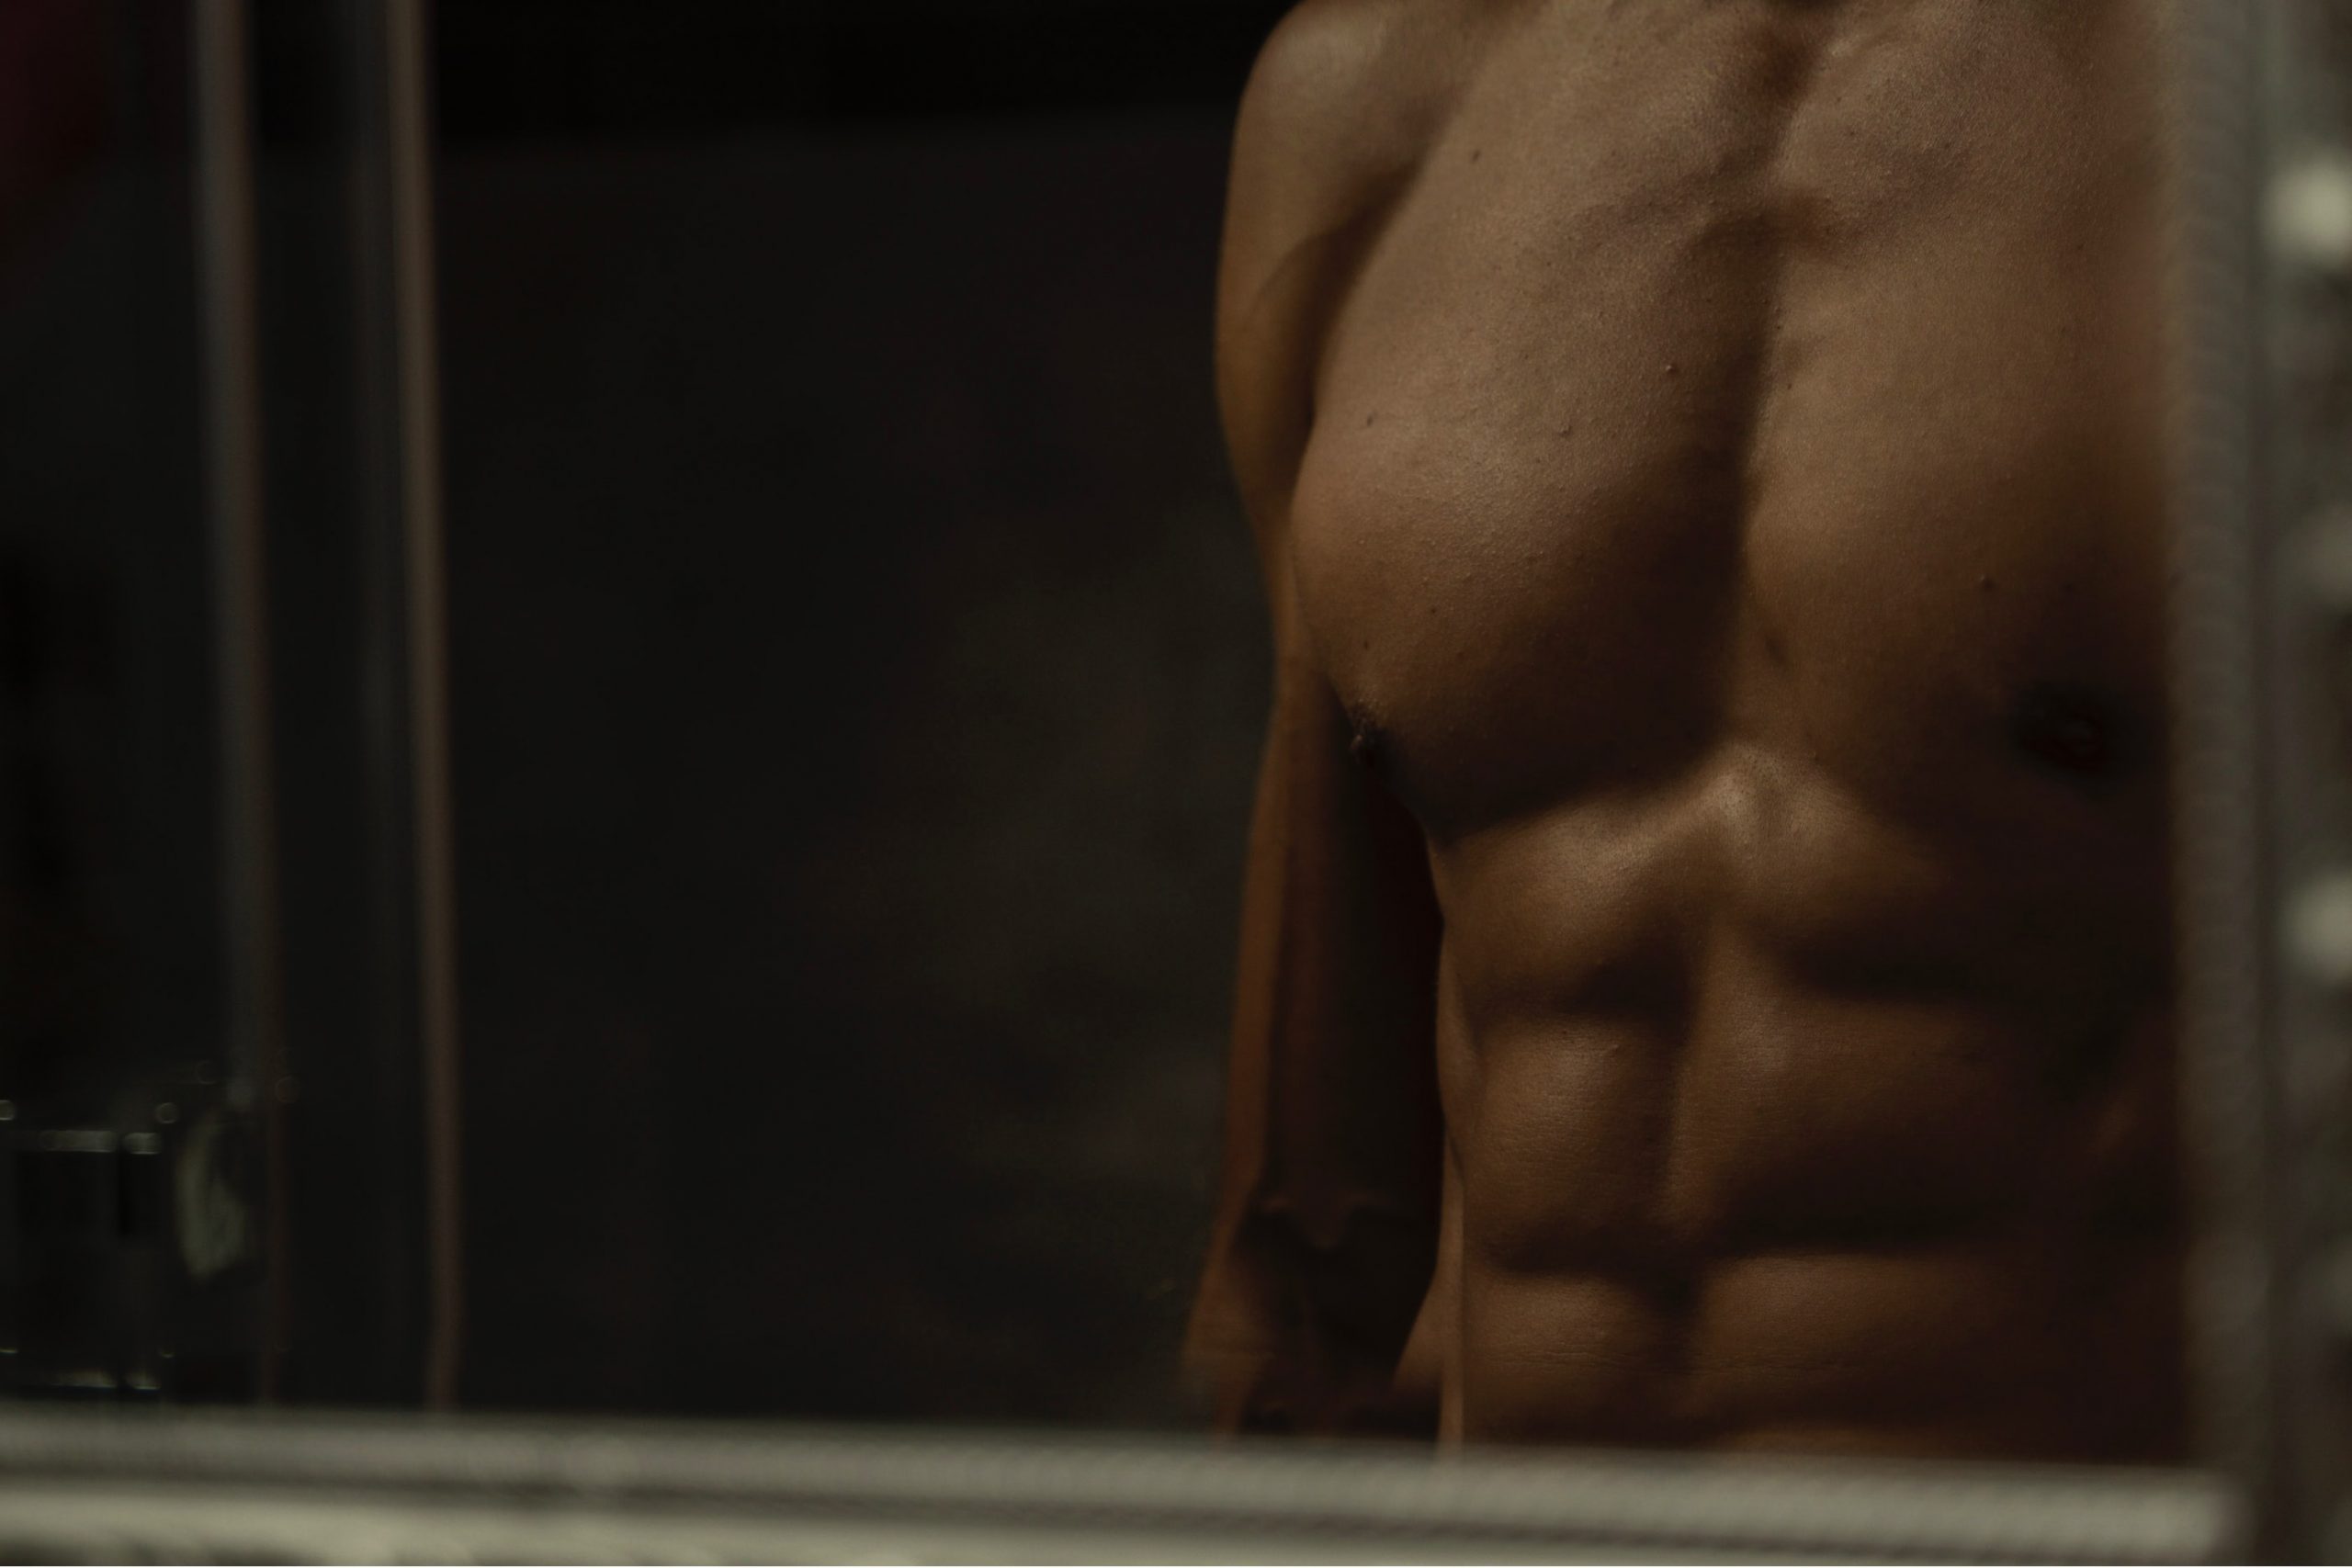 Man with shredded abs in front of a mirror